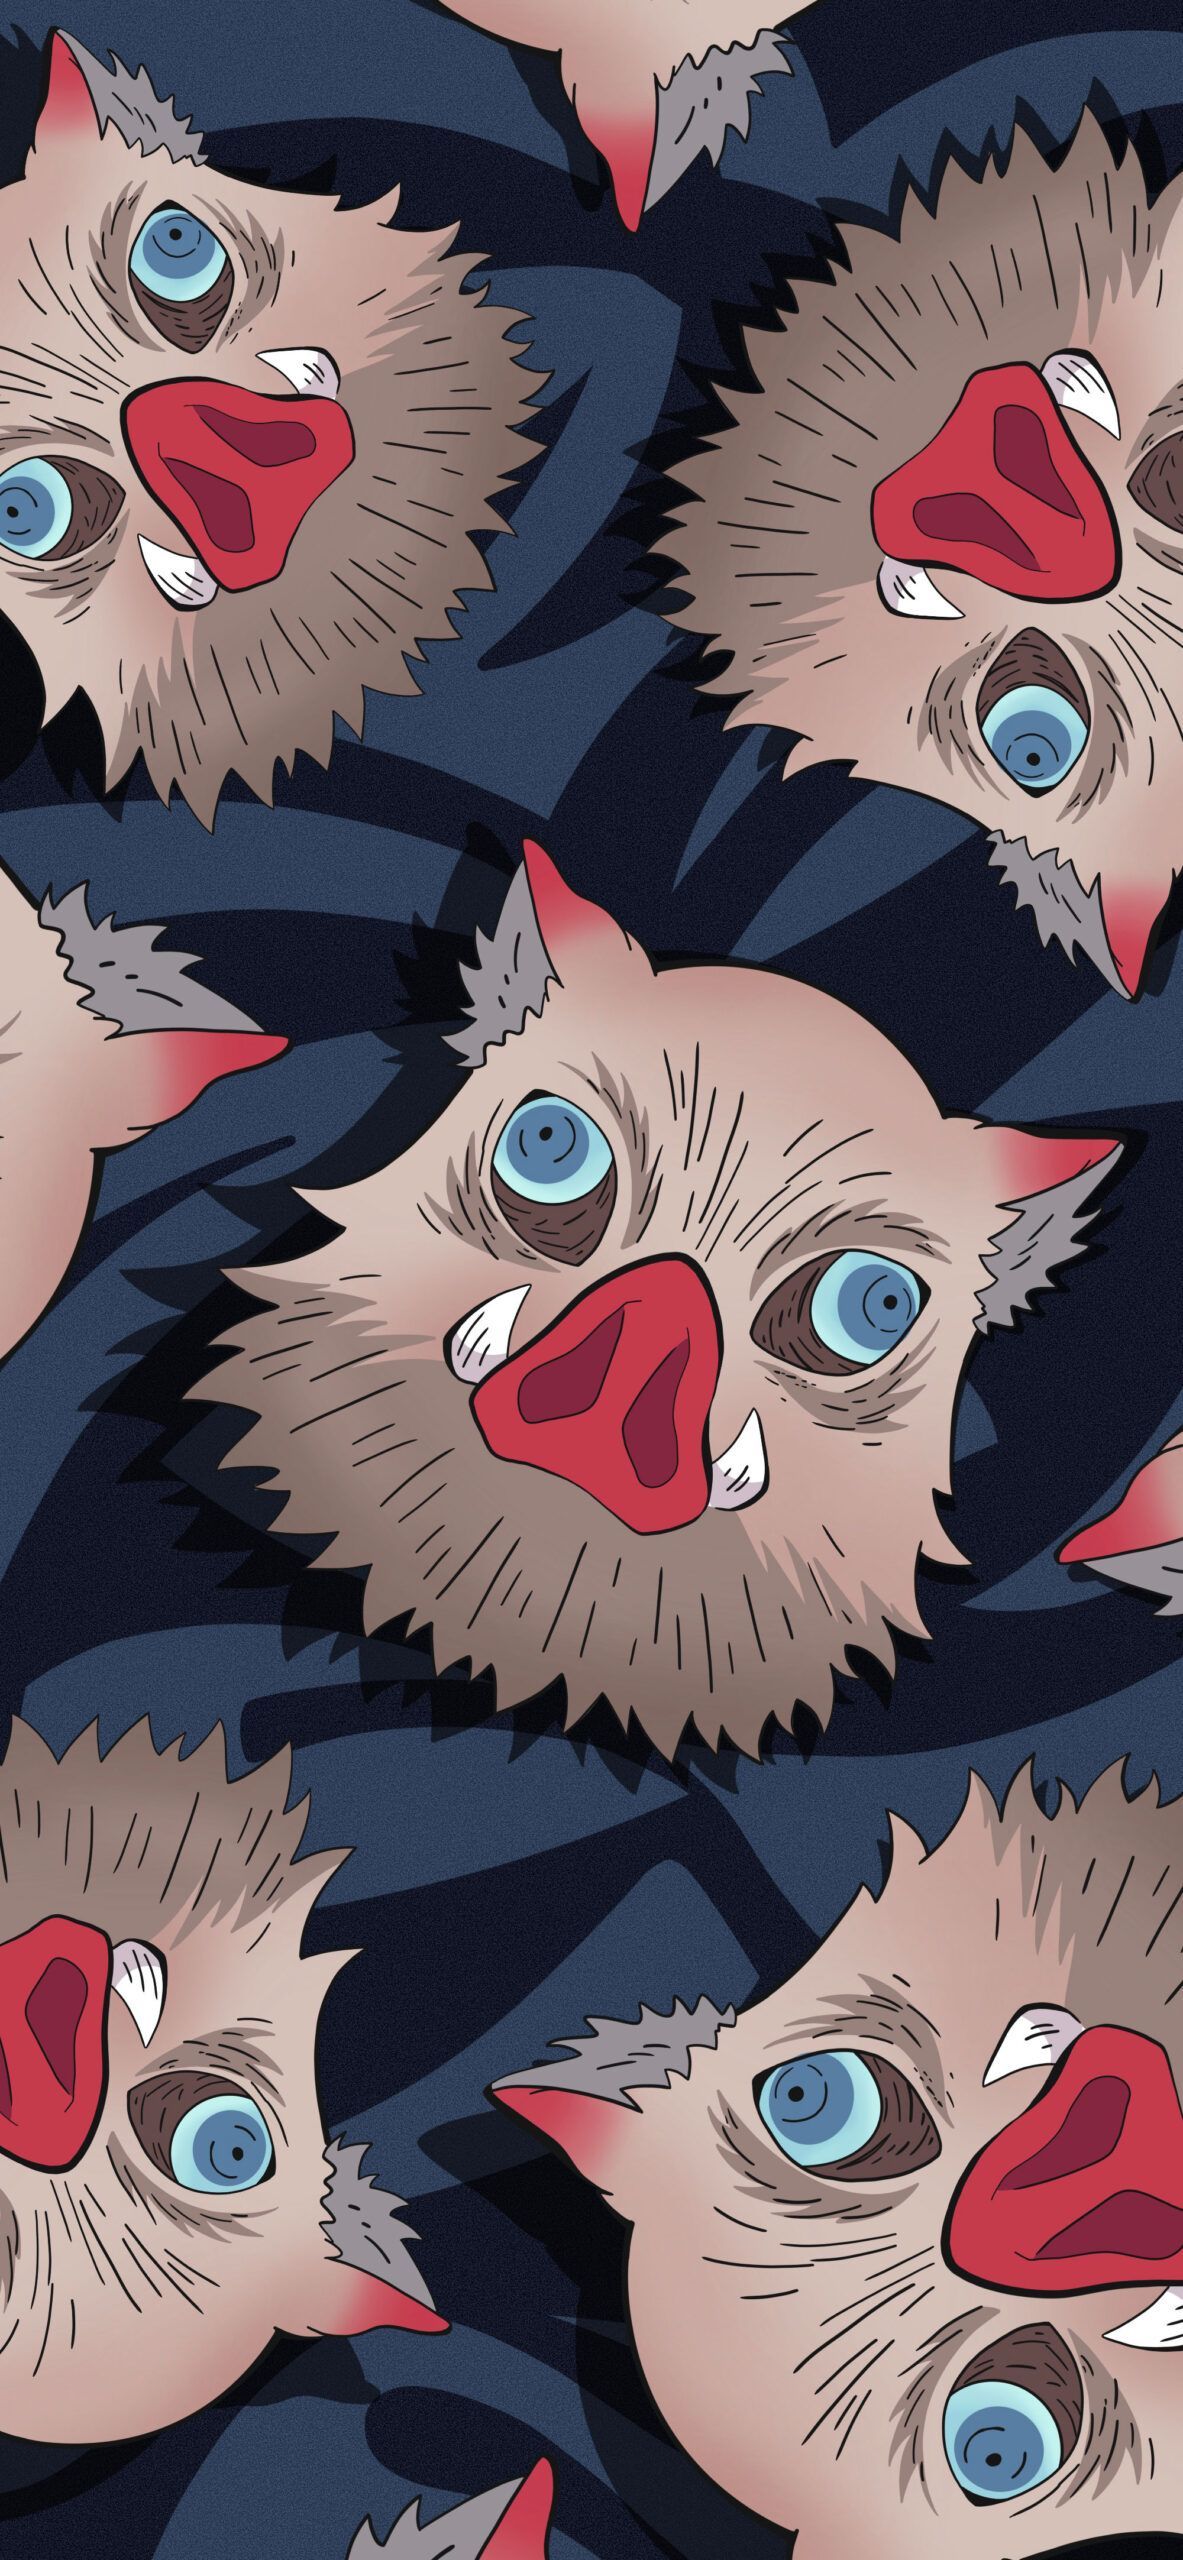 A pattern of cats with big eyes - Demon Slayer